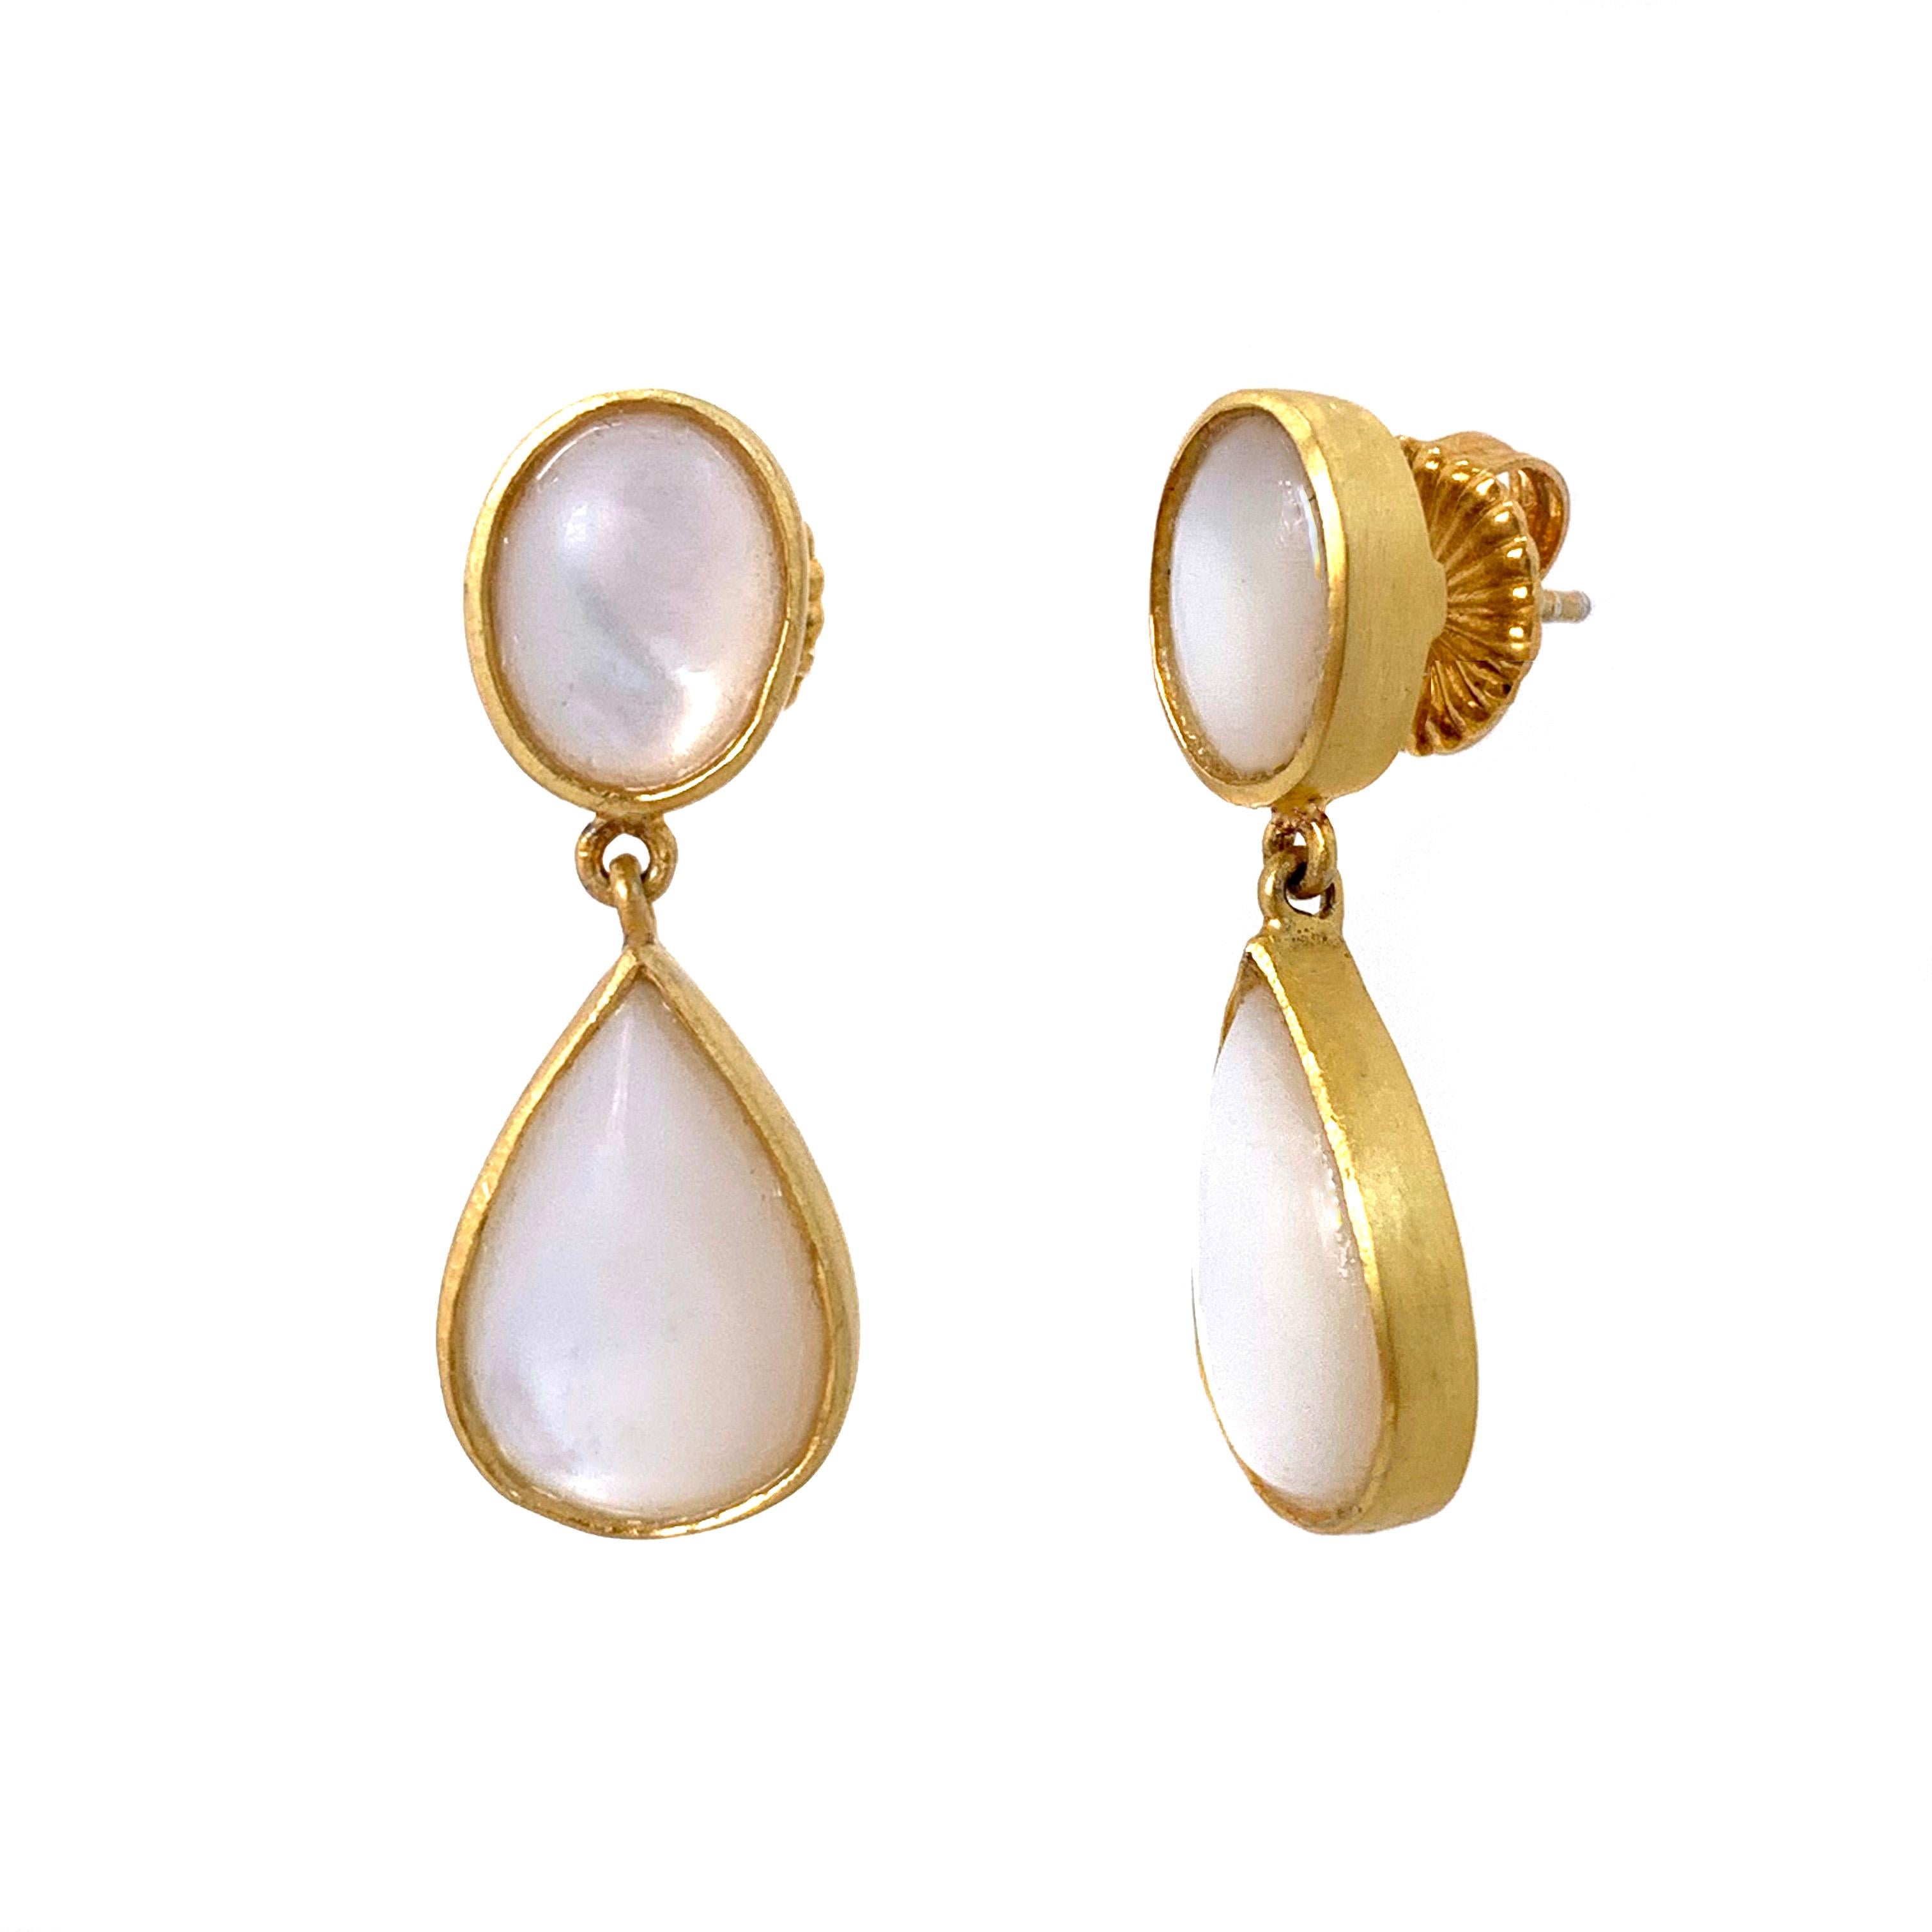 Discover this Oval and Pear Shape Mother of Pearl Vermeil Drop Earrings - all in Cabochon cut - hand set in 18k gold vermeil over sterling silver with matte finish. Straight post with large friction earring back for comfort and safety. The post is